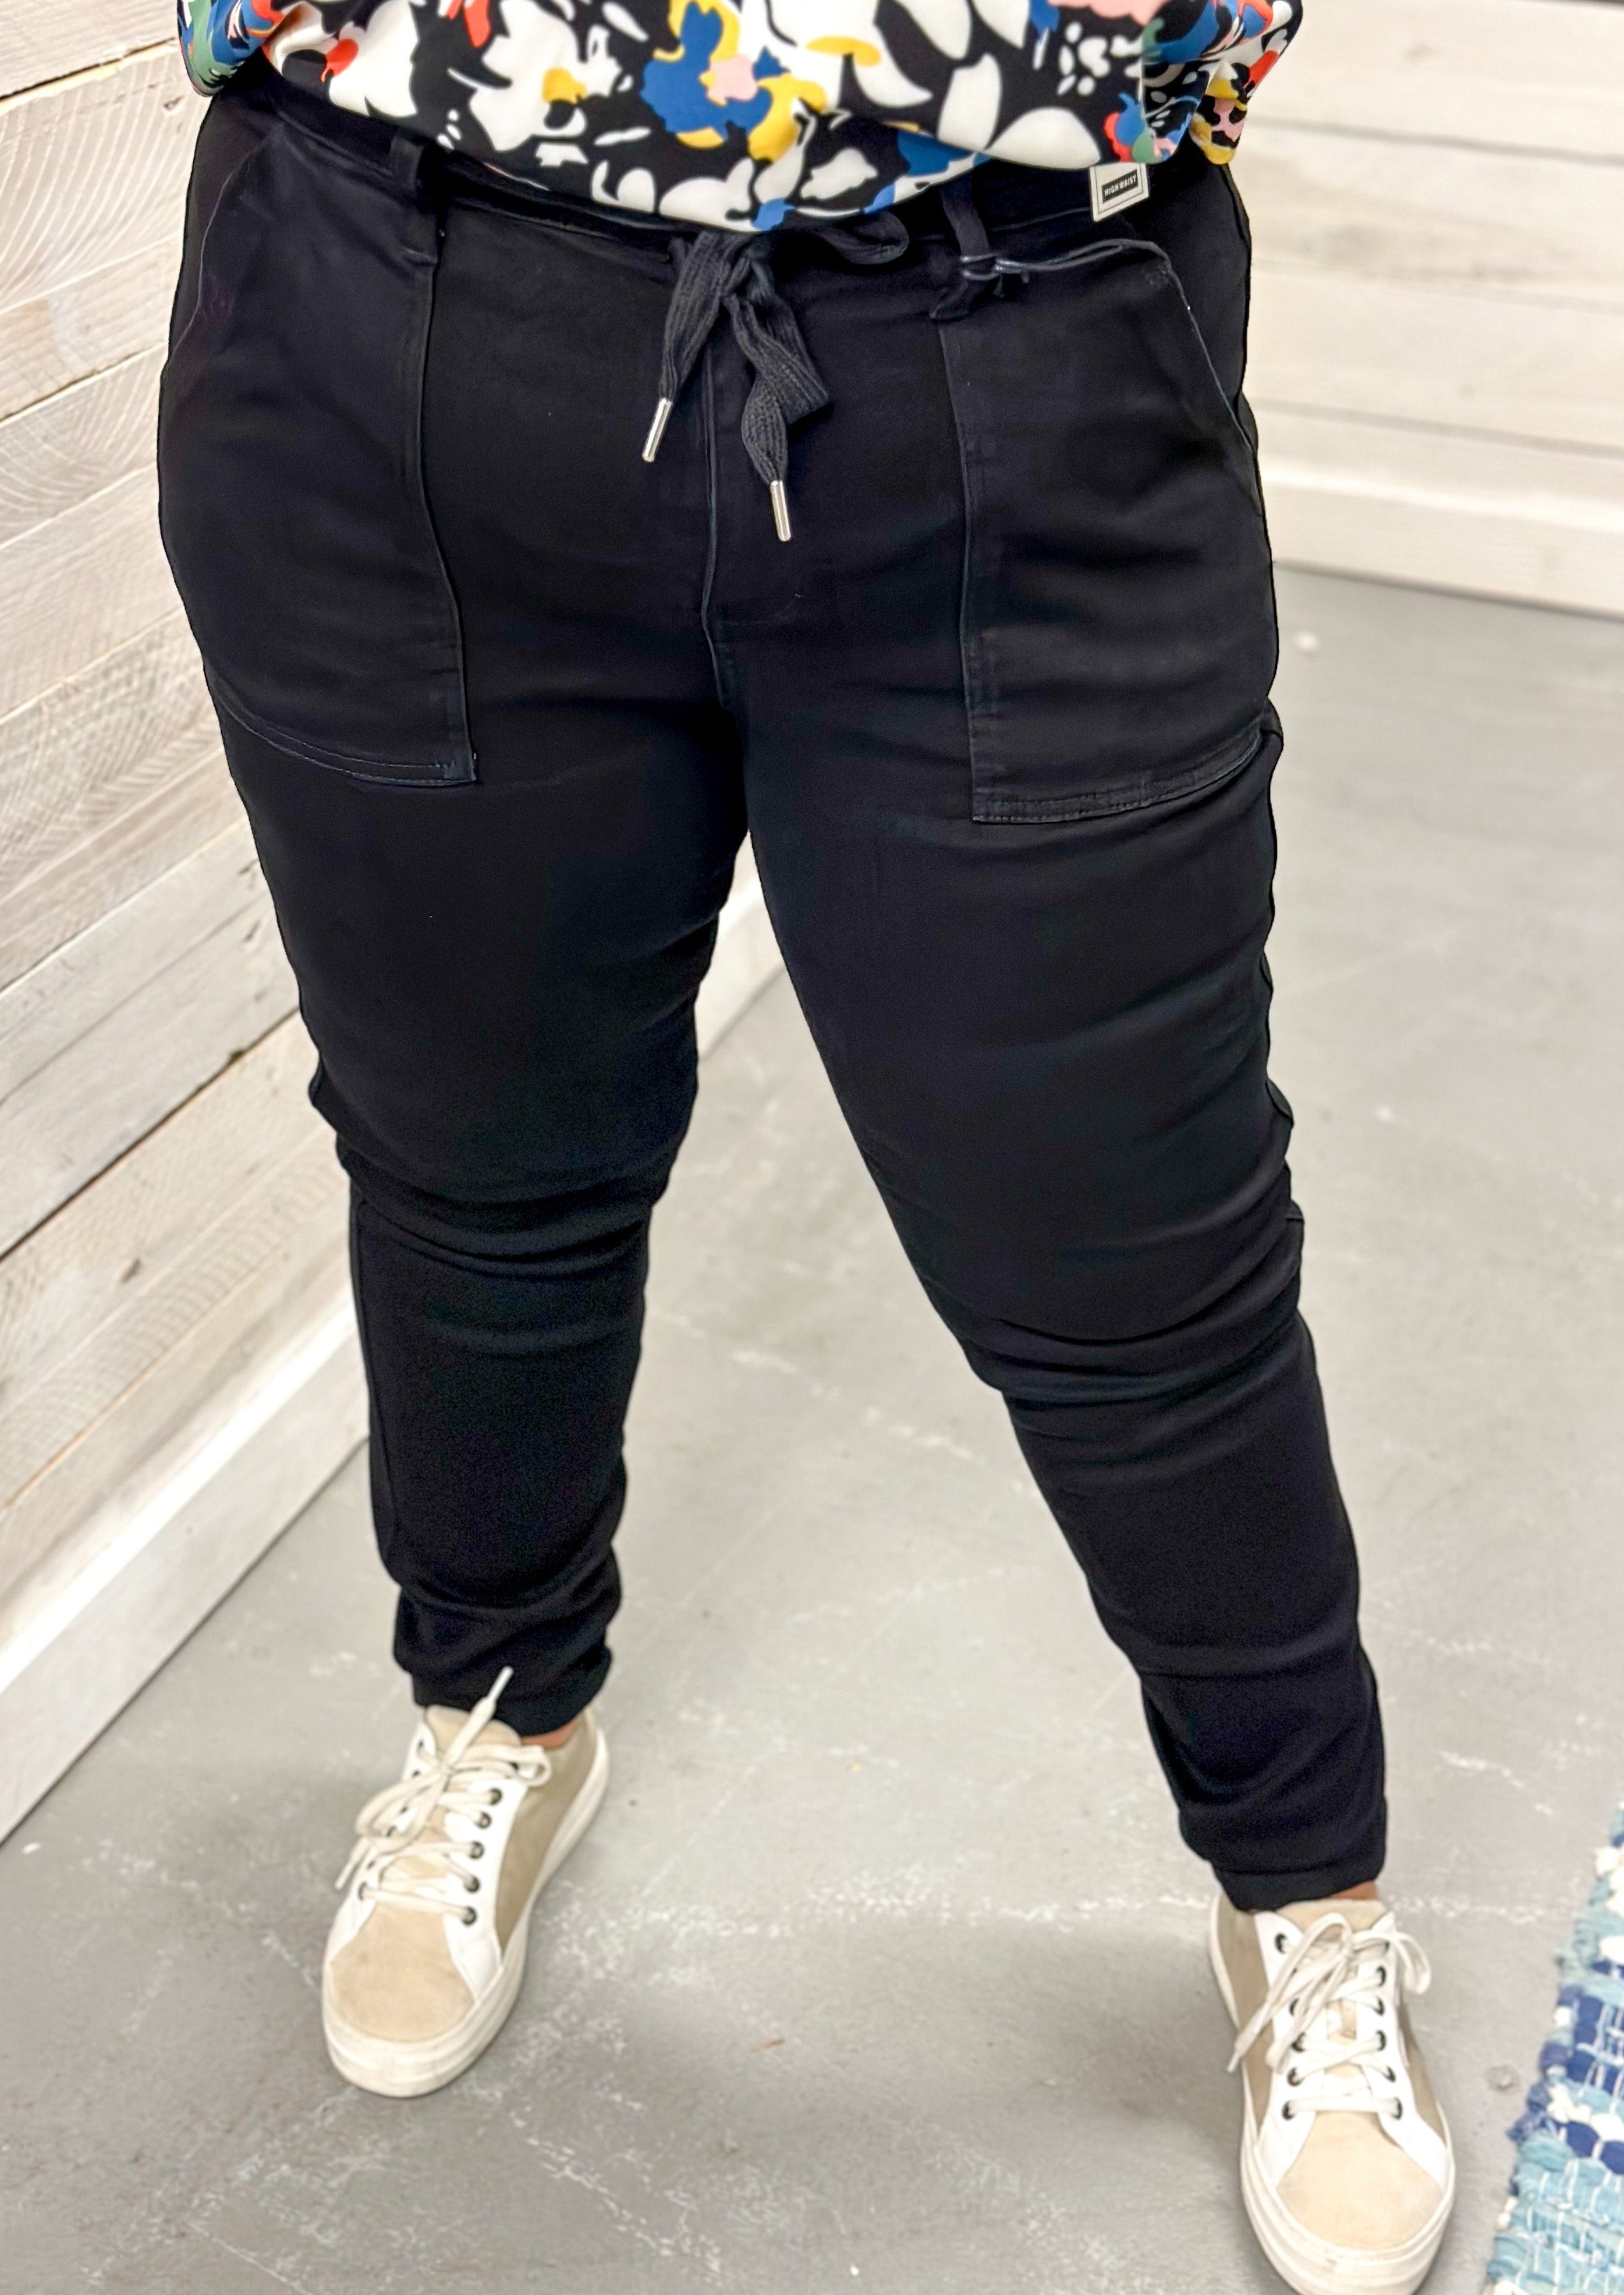 Judy Blue Joggers - Black - cuffed bottom that can be rolled or unrolled - pockets - black drawstring - belt loops - back pockets - elastic waist - front button and zipper